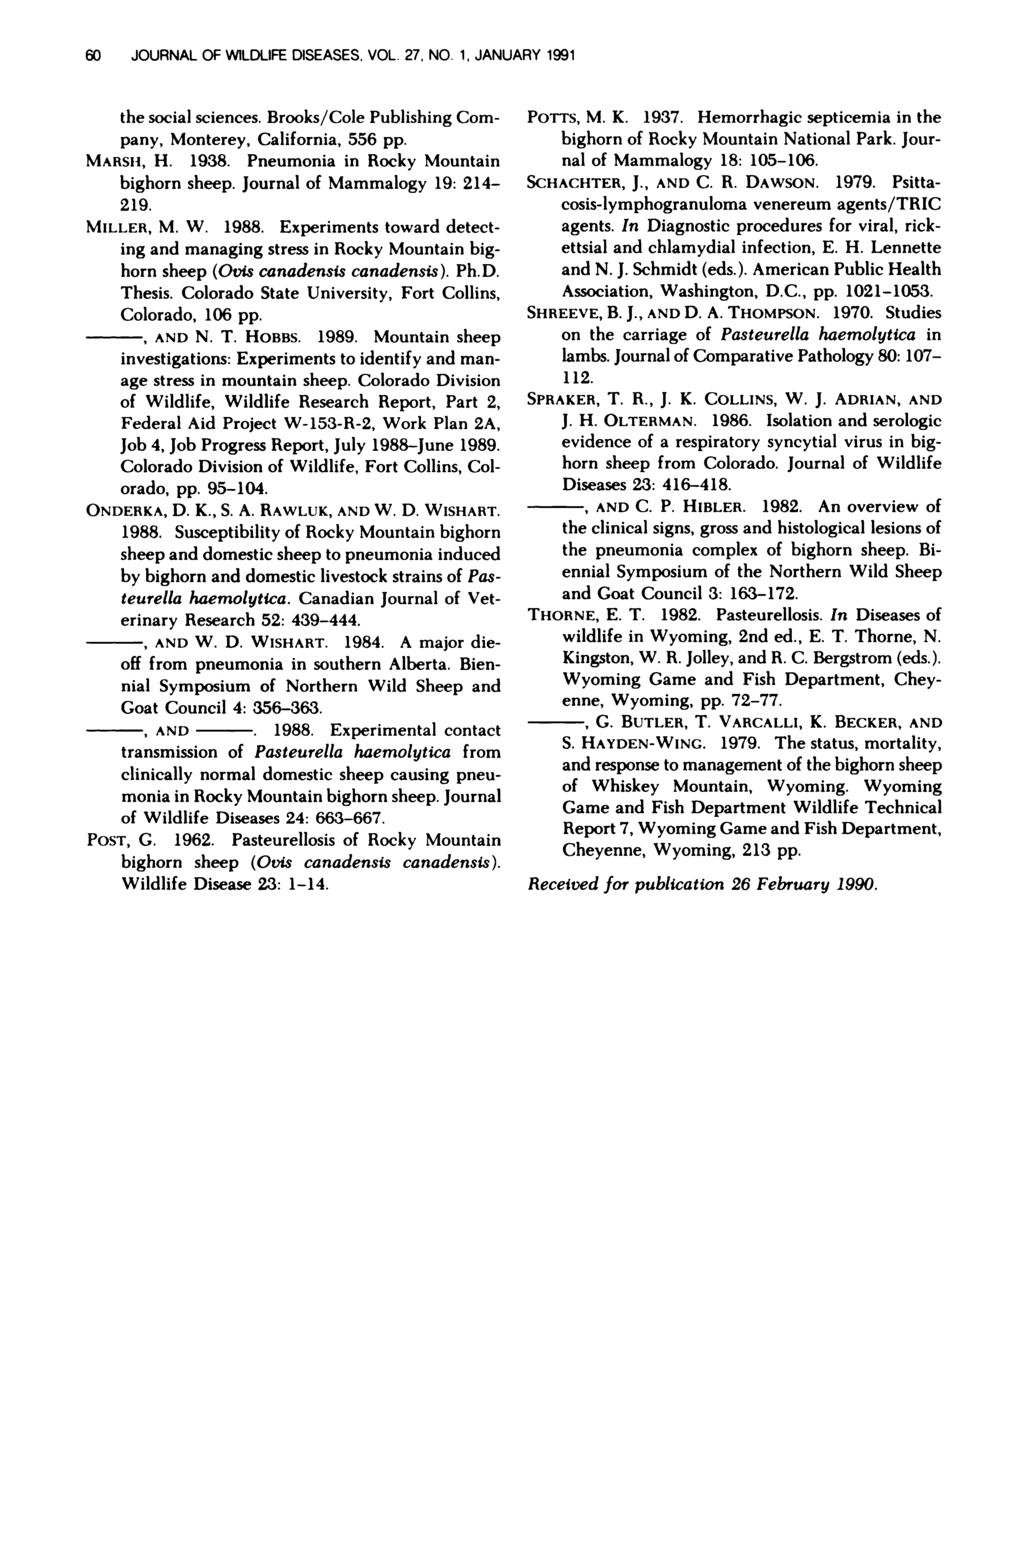 60 JOURNAL OF WiLDLIFE DISEASES, VOL. 27, NO. 1, JANUARY 1991 the social sciences. Brooks/Cole Publishing Company, Monterey, California, 556 pp. MARSH, H. 1938.